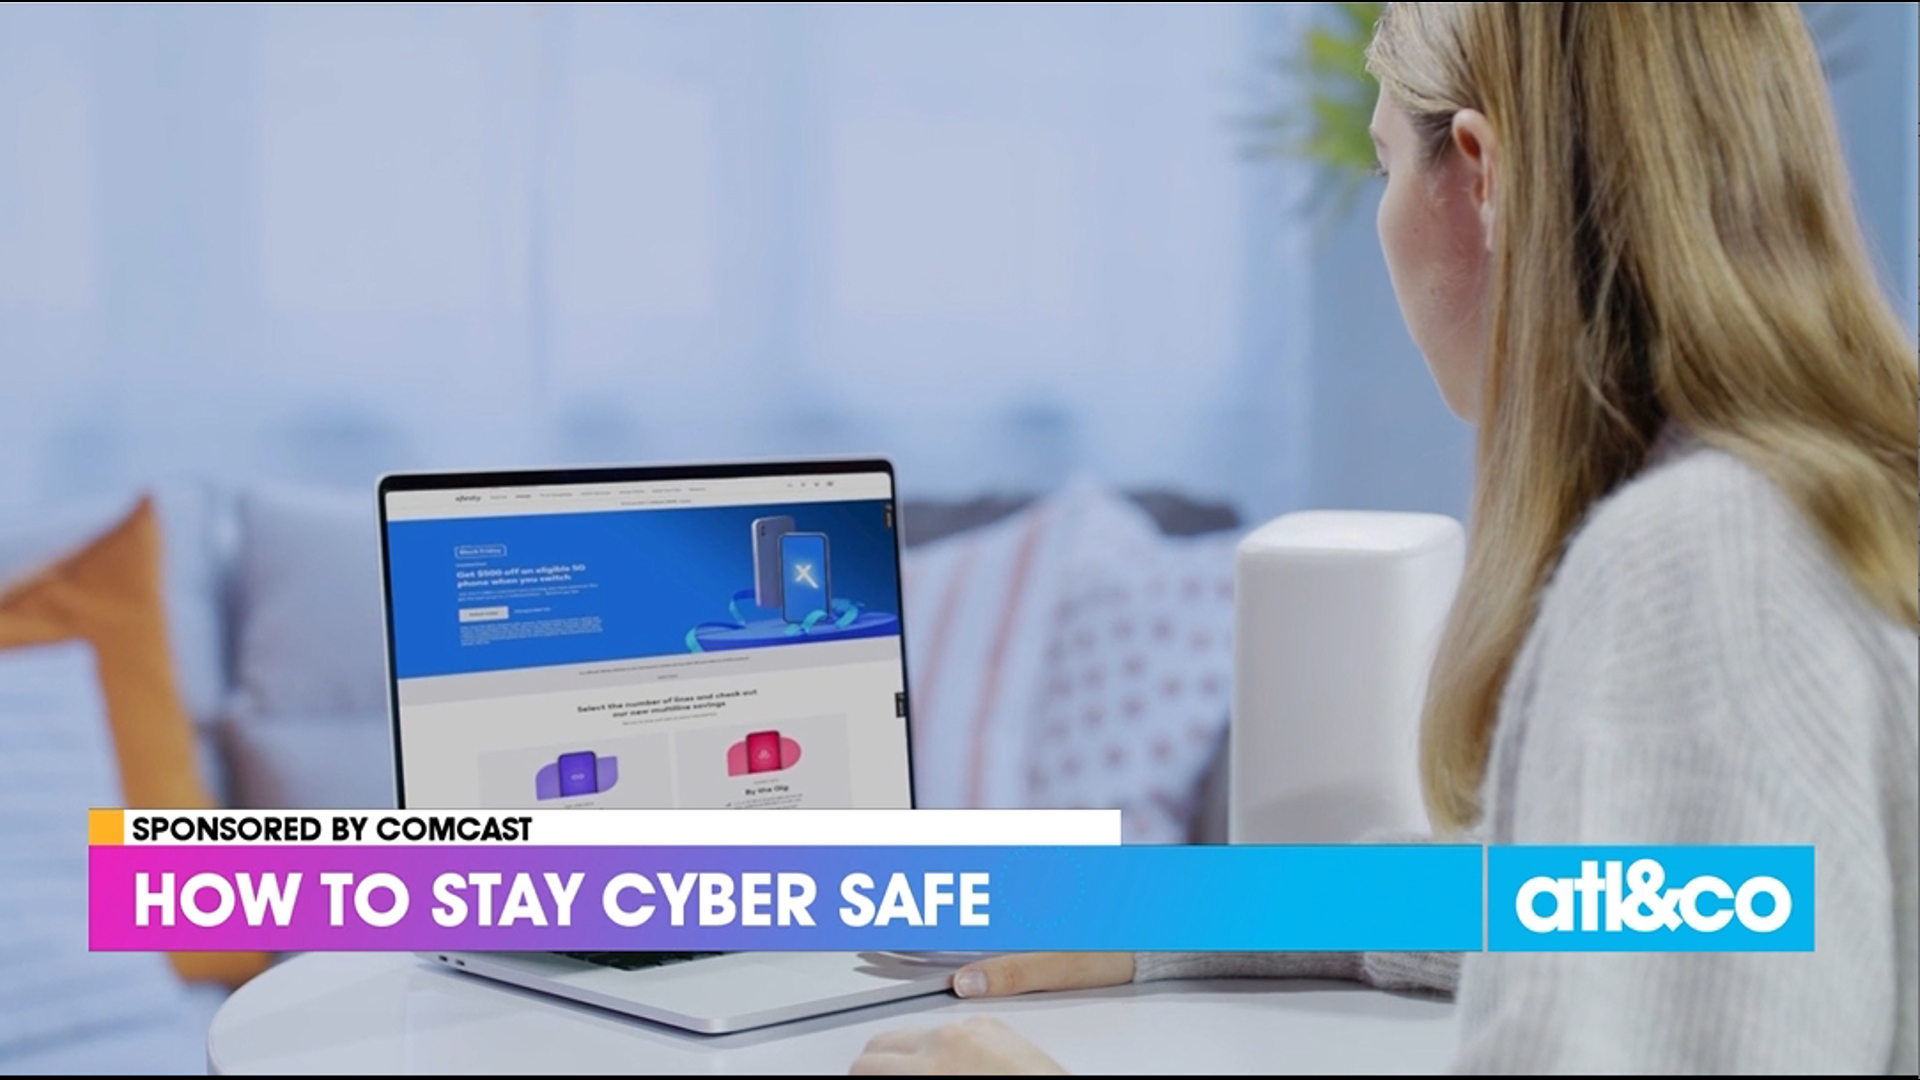 Comcast shares tips to keep your home safe from cyber attacks.